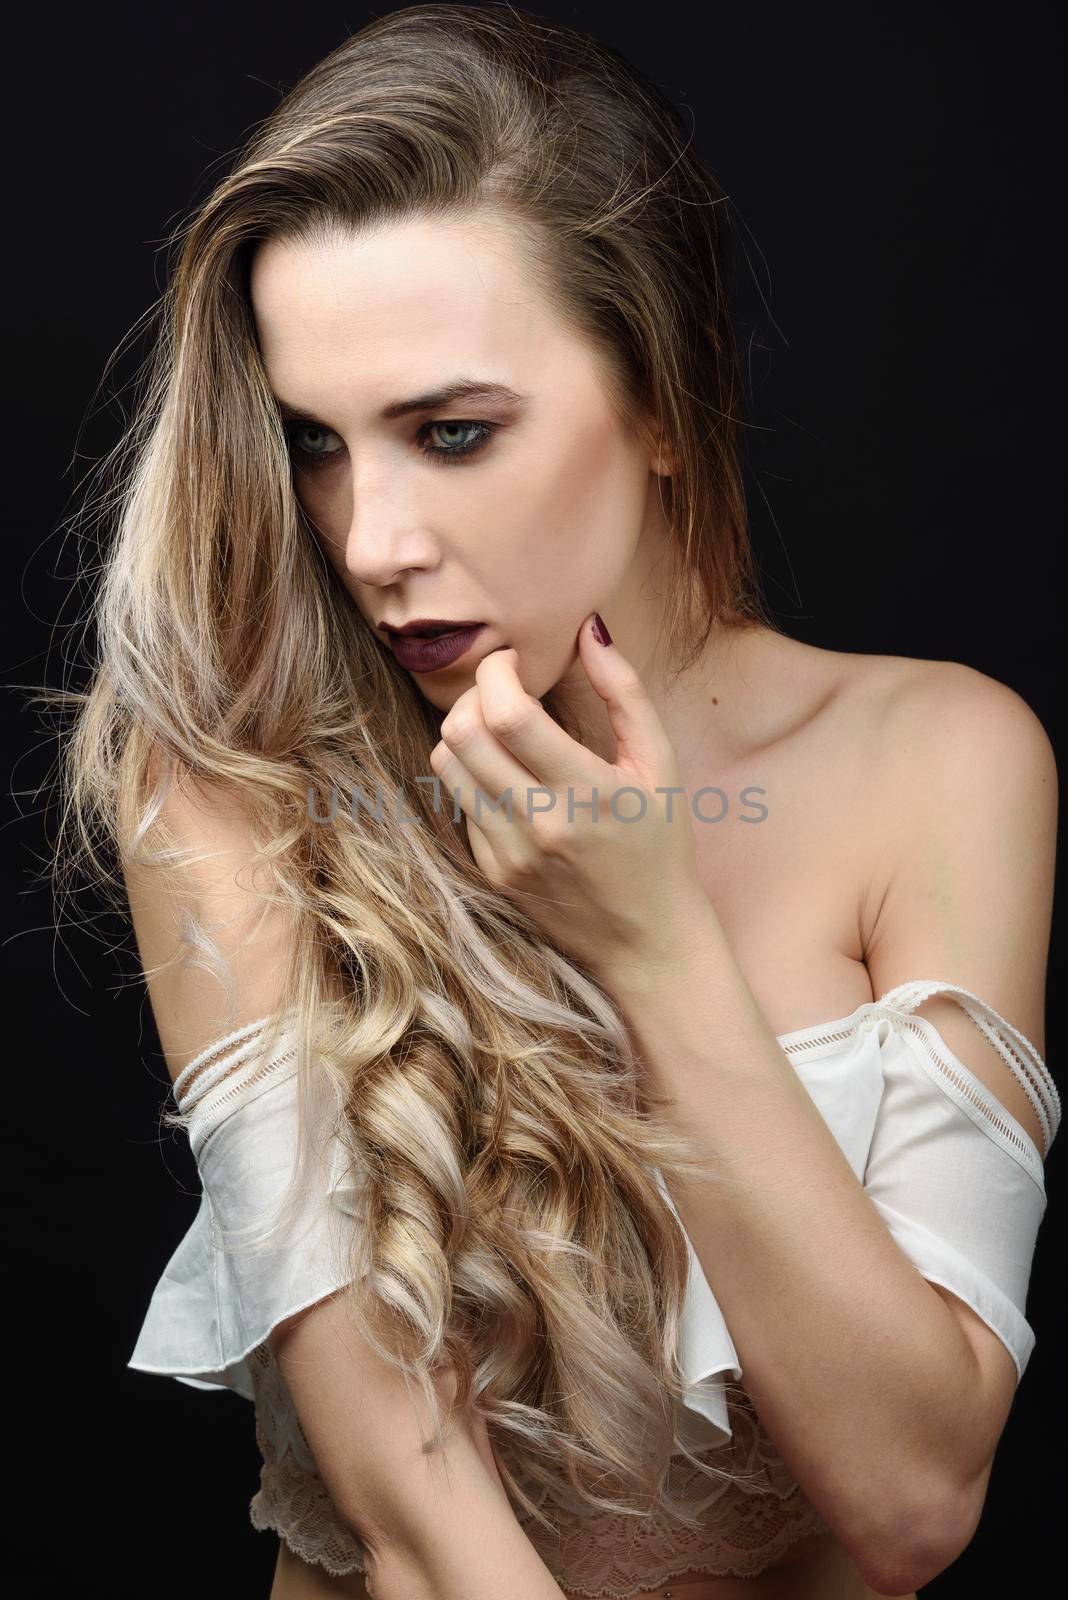 Young woman with long hair and blue eyes against black background with purple make-up. Fashion concept.